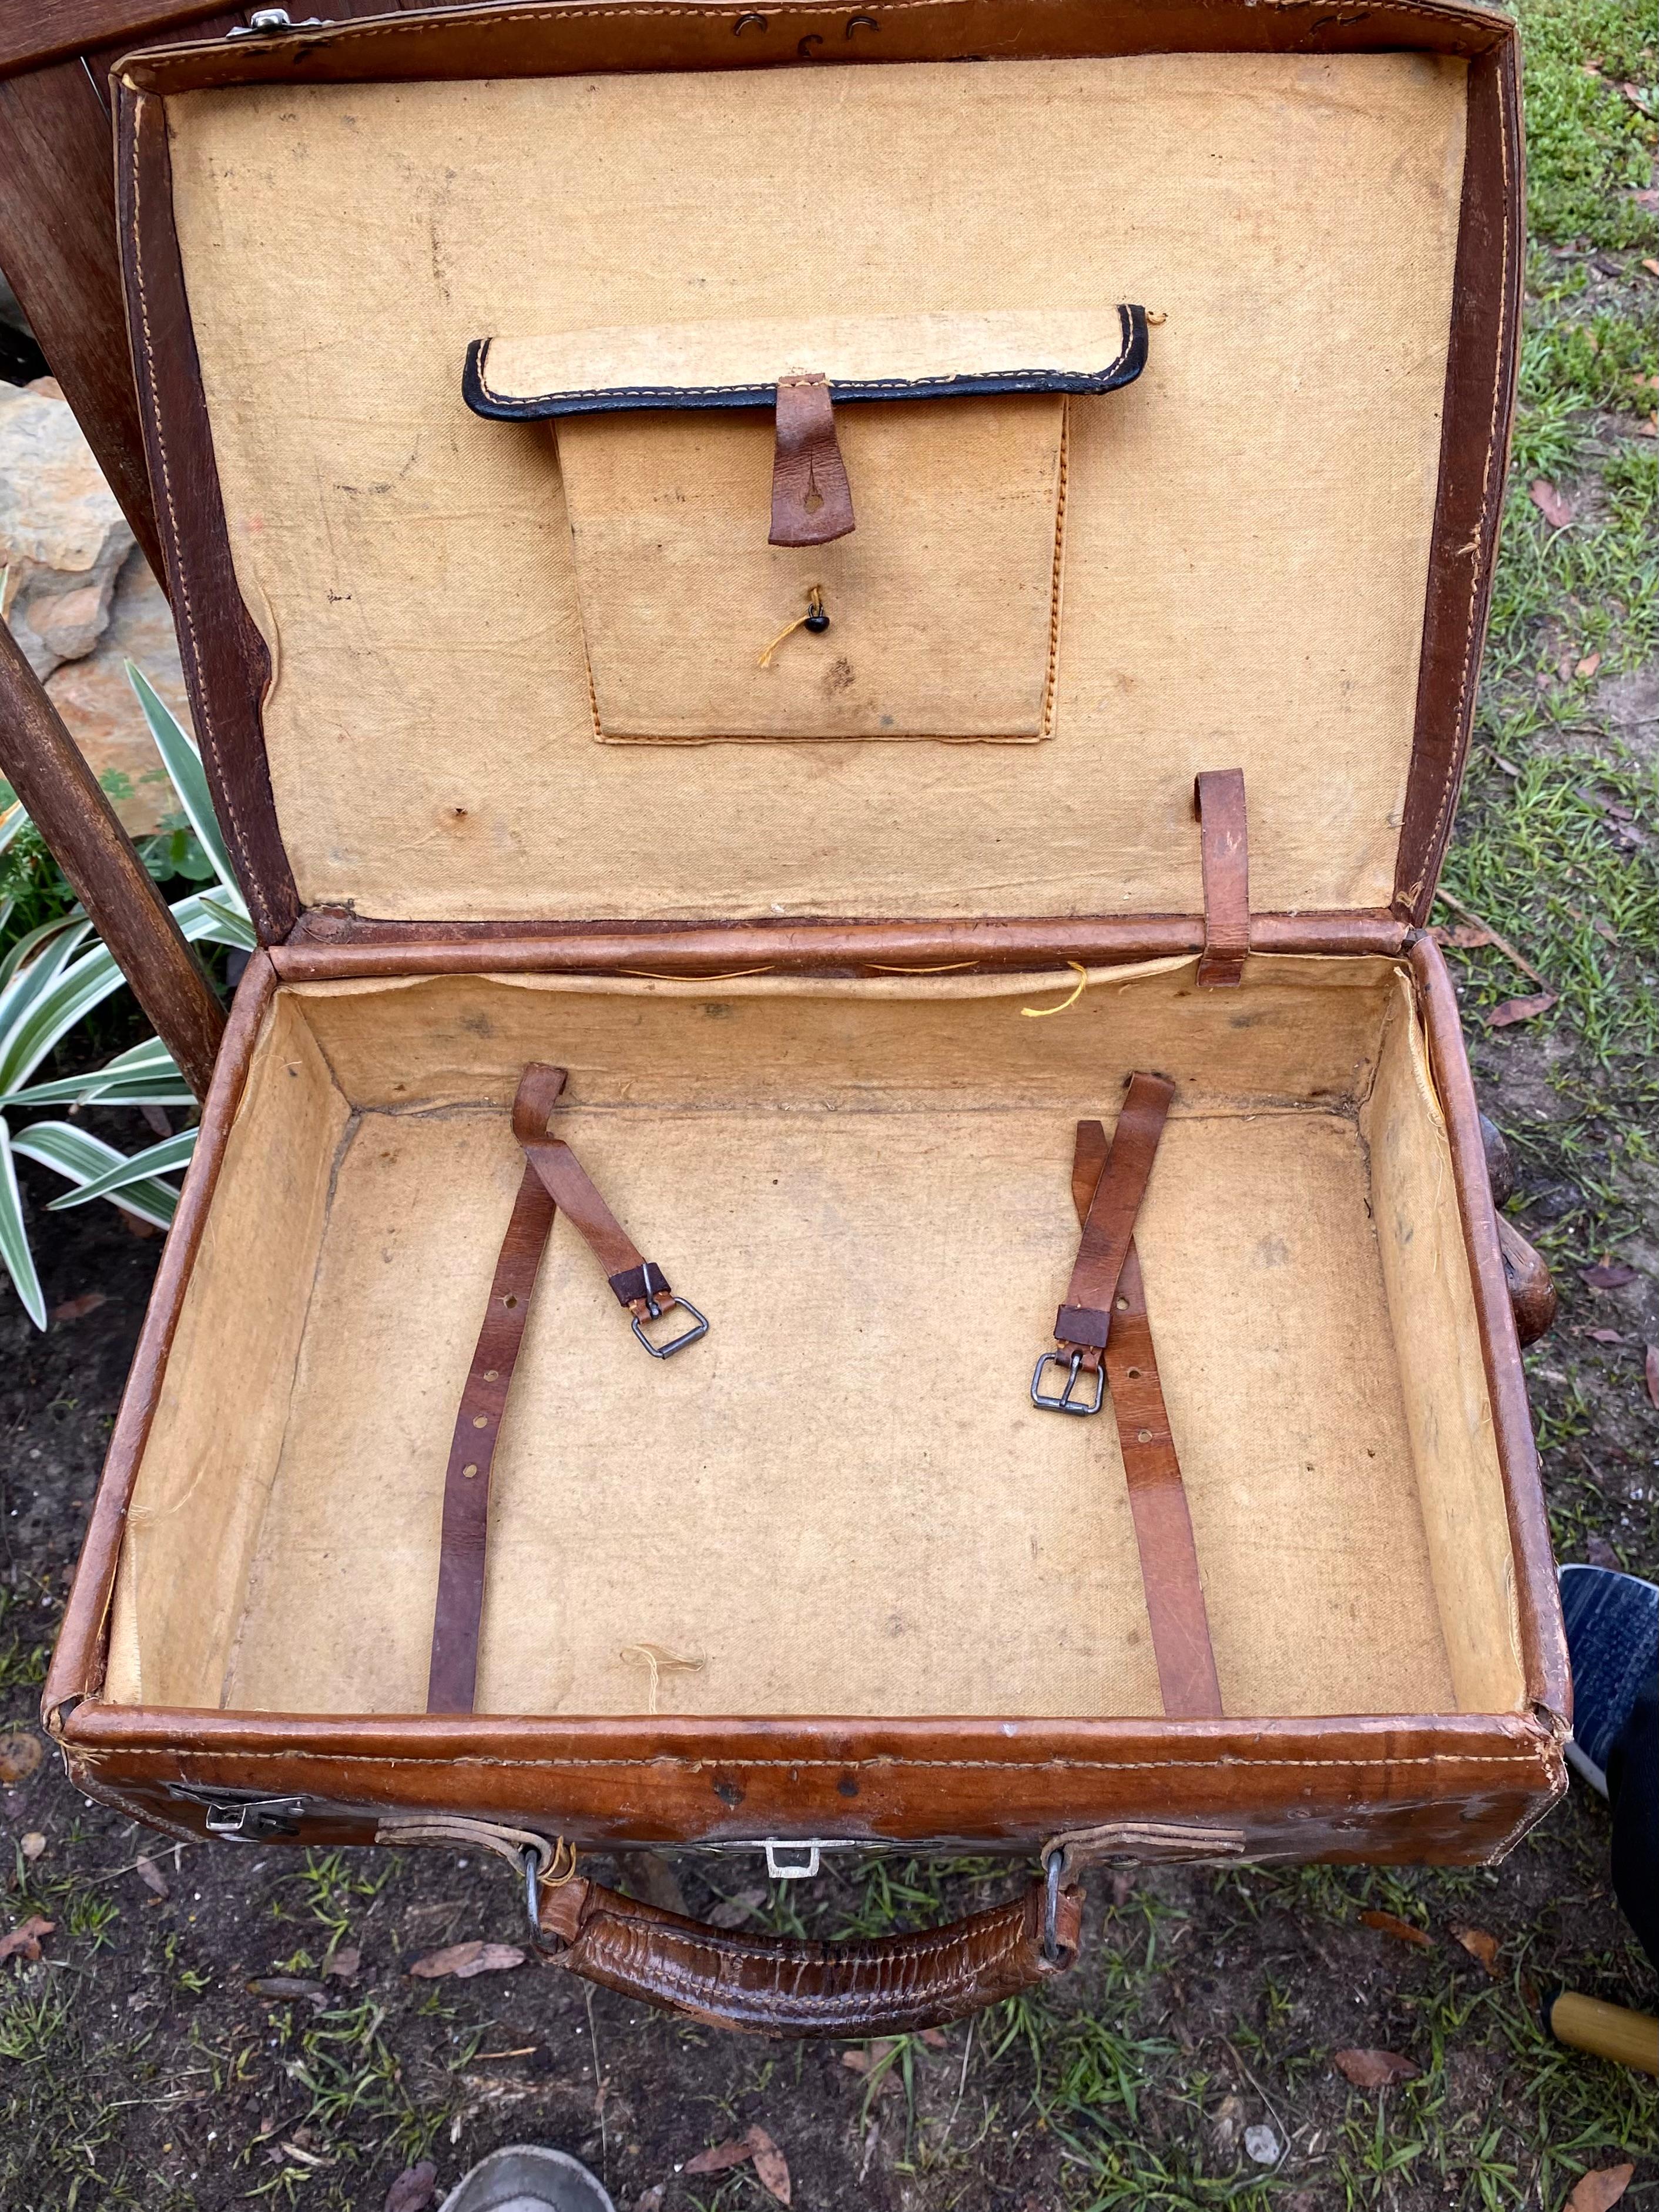 Early 20th Century Antique French Hand Stitched Leather Suitcase